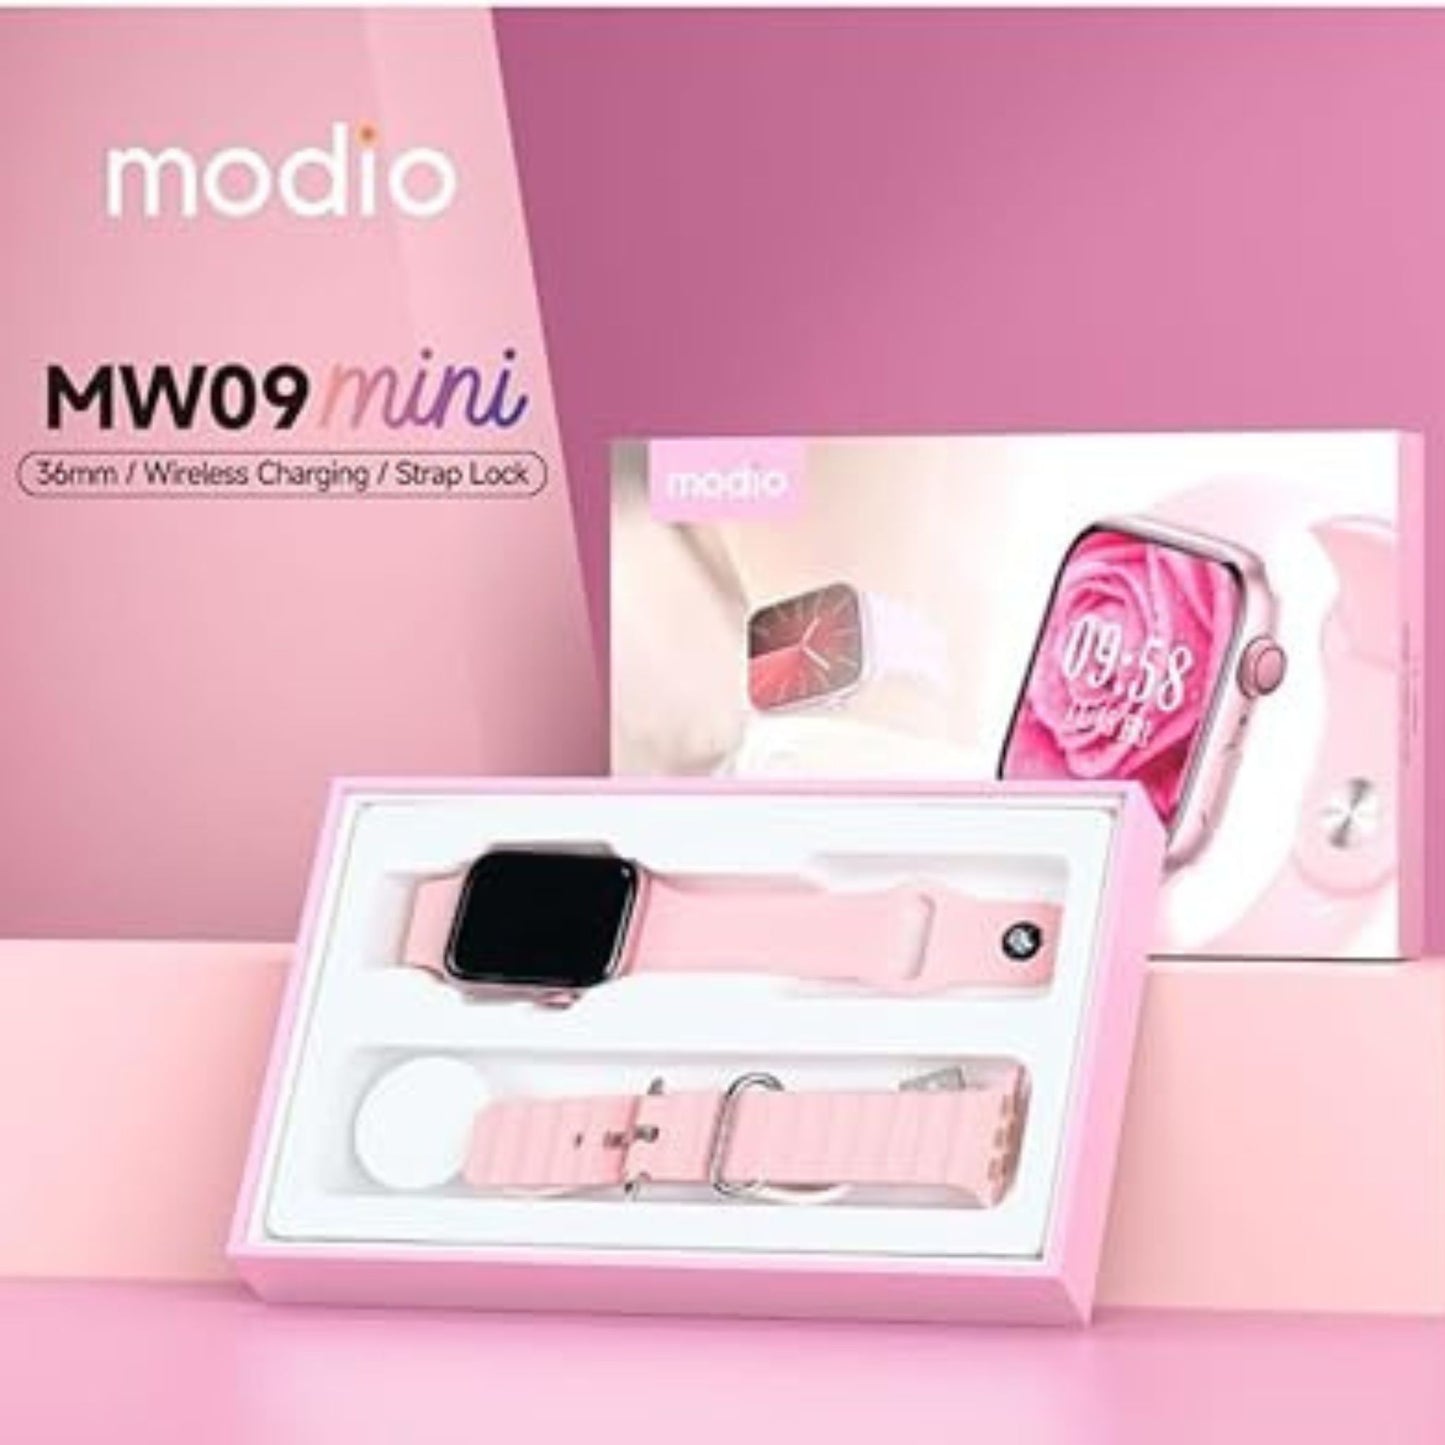 Modio MW09 Mini 36MM Smartwatch Bundle: Includes 2 Pairs of Straps and a Wireless Charger, Perfect for Ladies and Girls in Pink